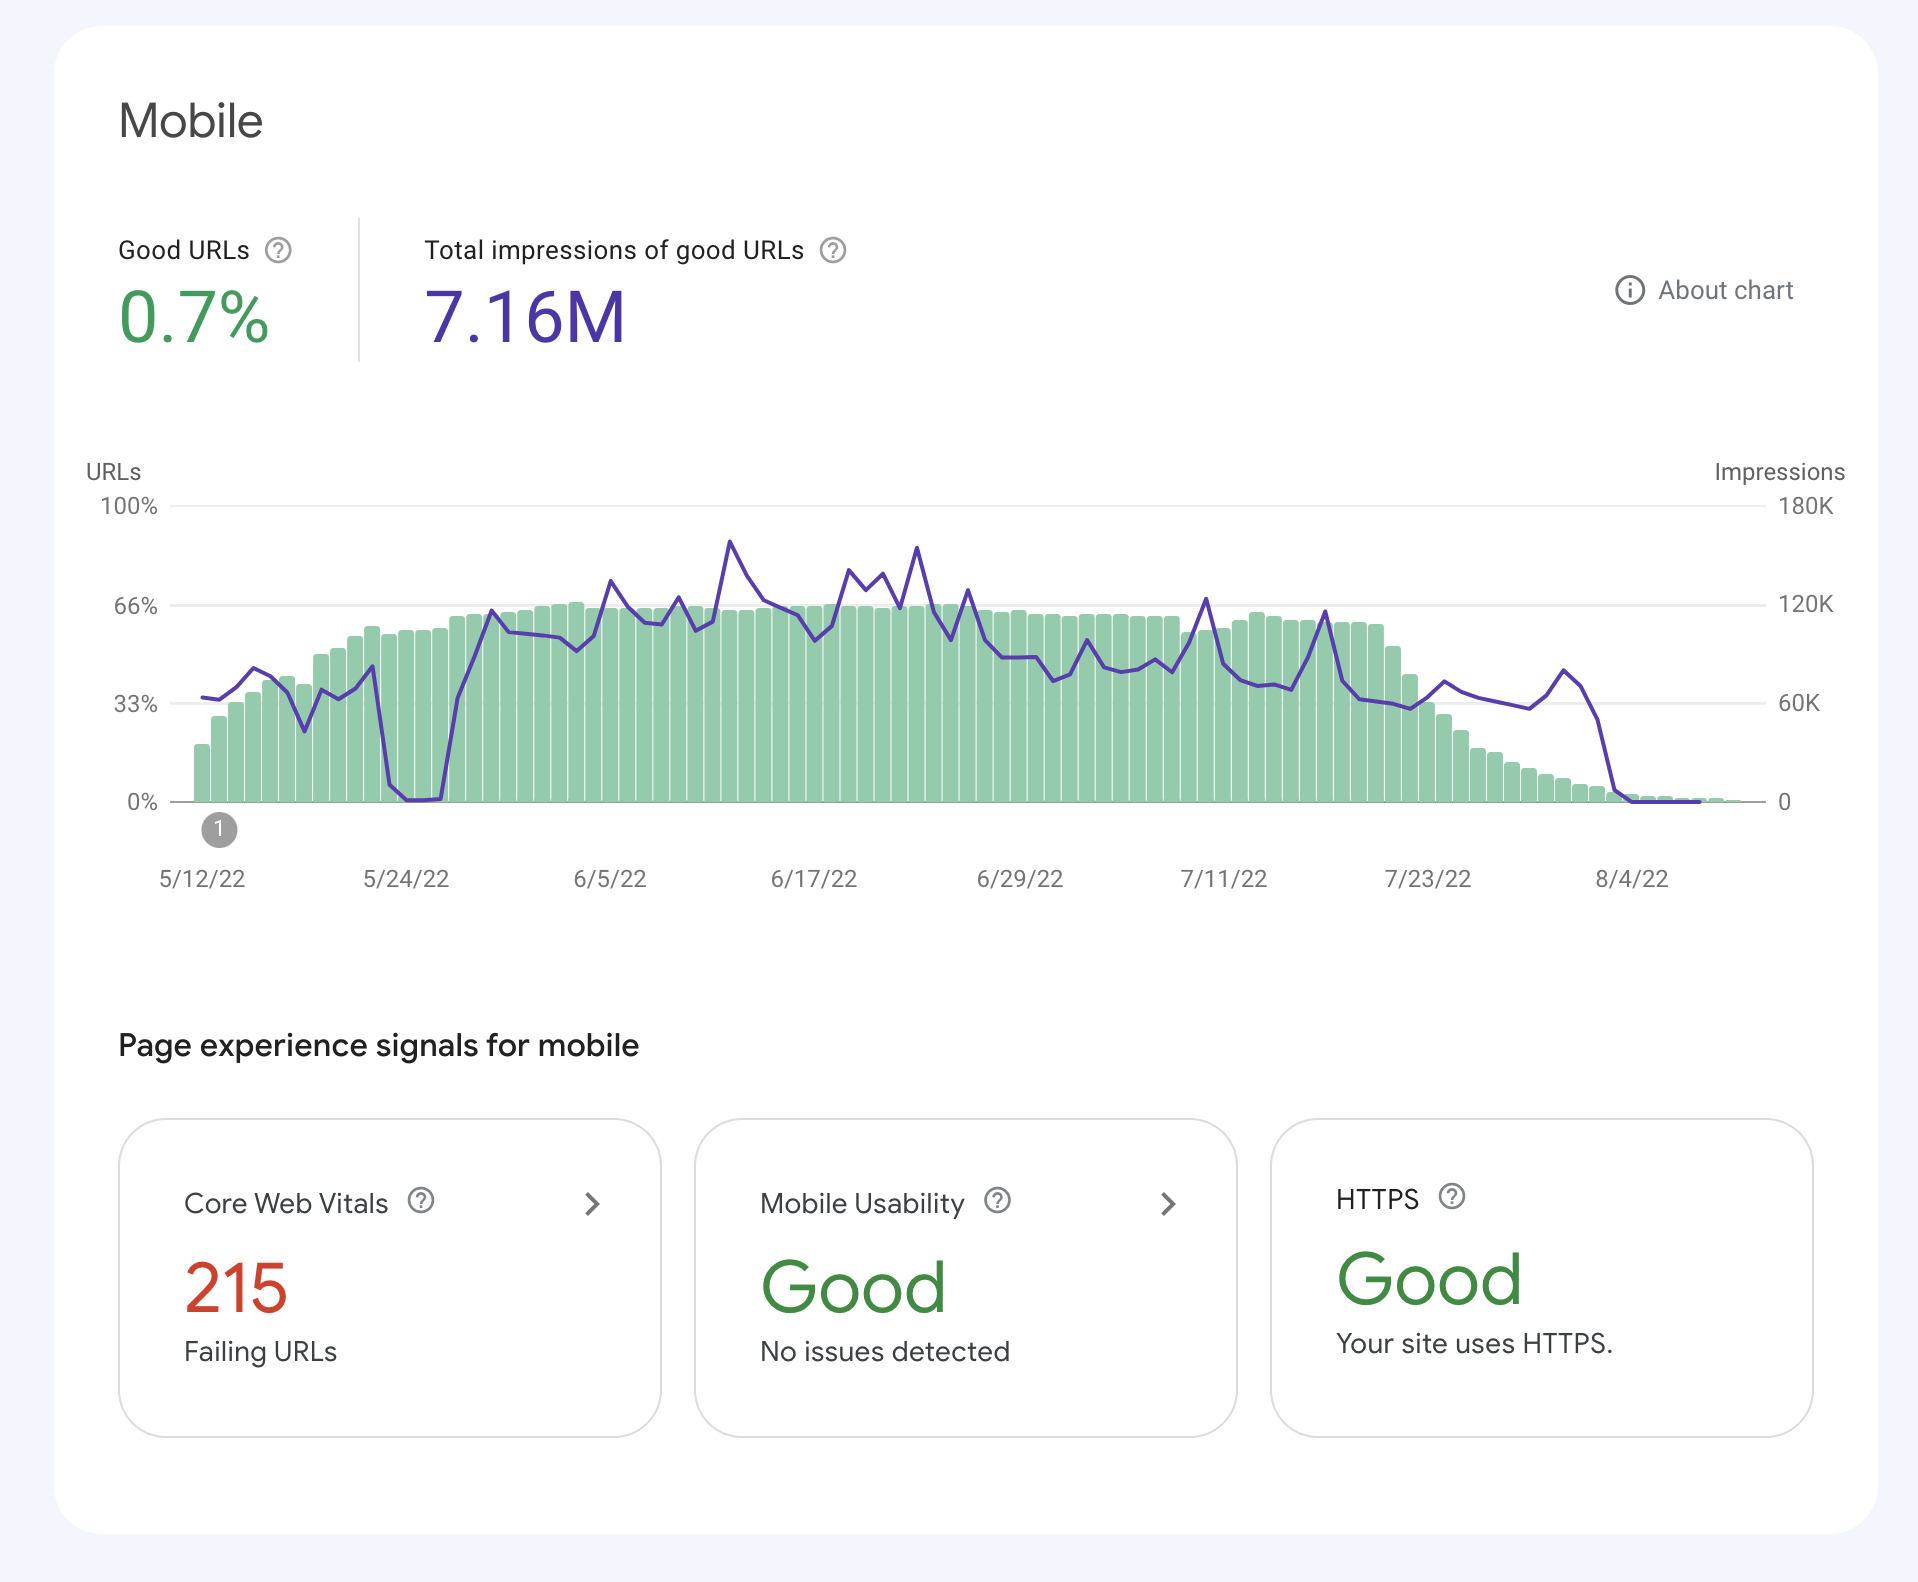 Google Search console chart for mobile. Good page experience